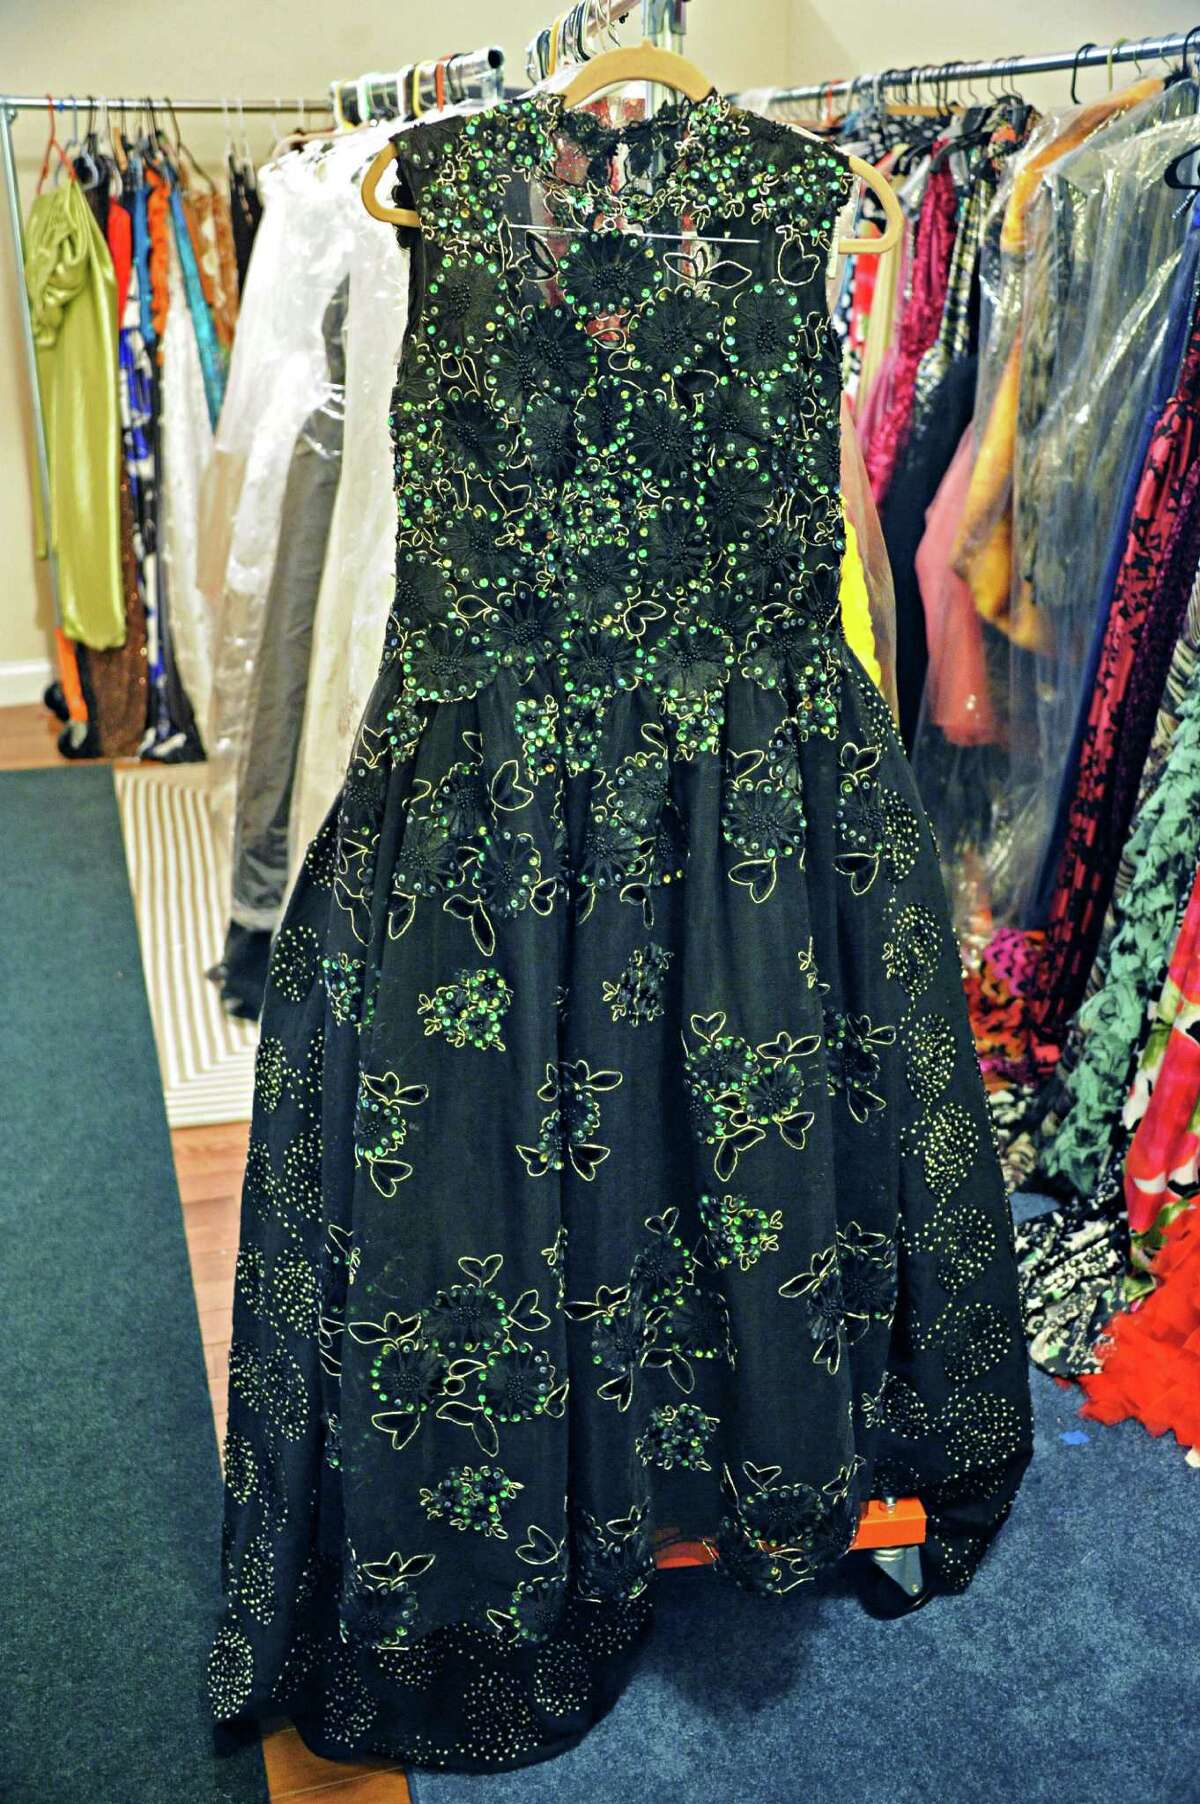 A dress for the mother of Thomas Curley, who won an Oscar for sound mixing for the film OWhiplash" by local designer Daniel Mozzes at his Pearl Street studio Wednesday March 18, 2015 in Albany, NY. (John Carl D'Annibale / Times Union)